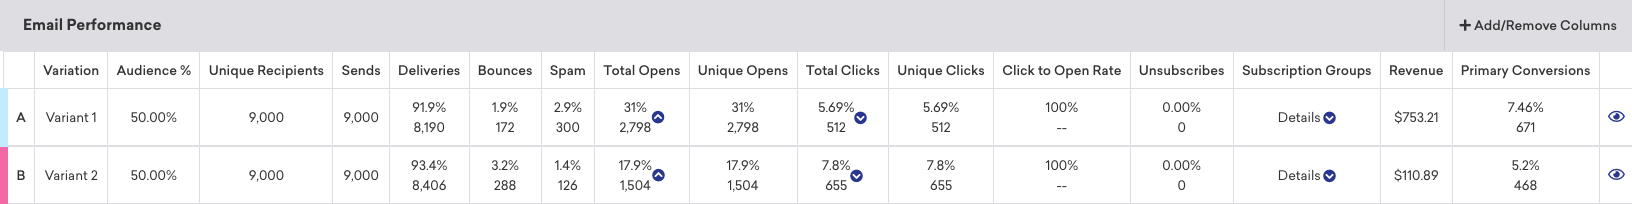 Performance section of the Campaign Analytics for an email campaign with multiple variants. The table lists various performance metrics for each variant, such as recipients, bounces, clicks, and conversions.